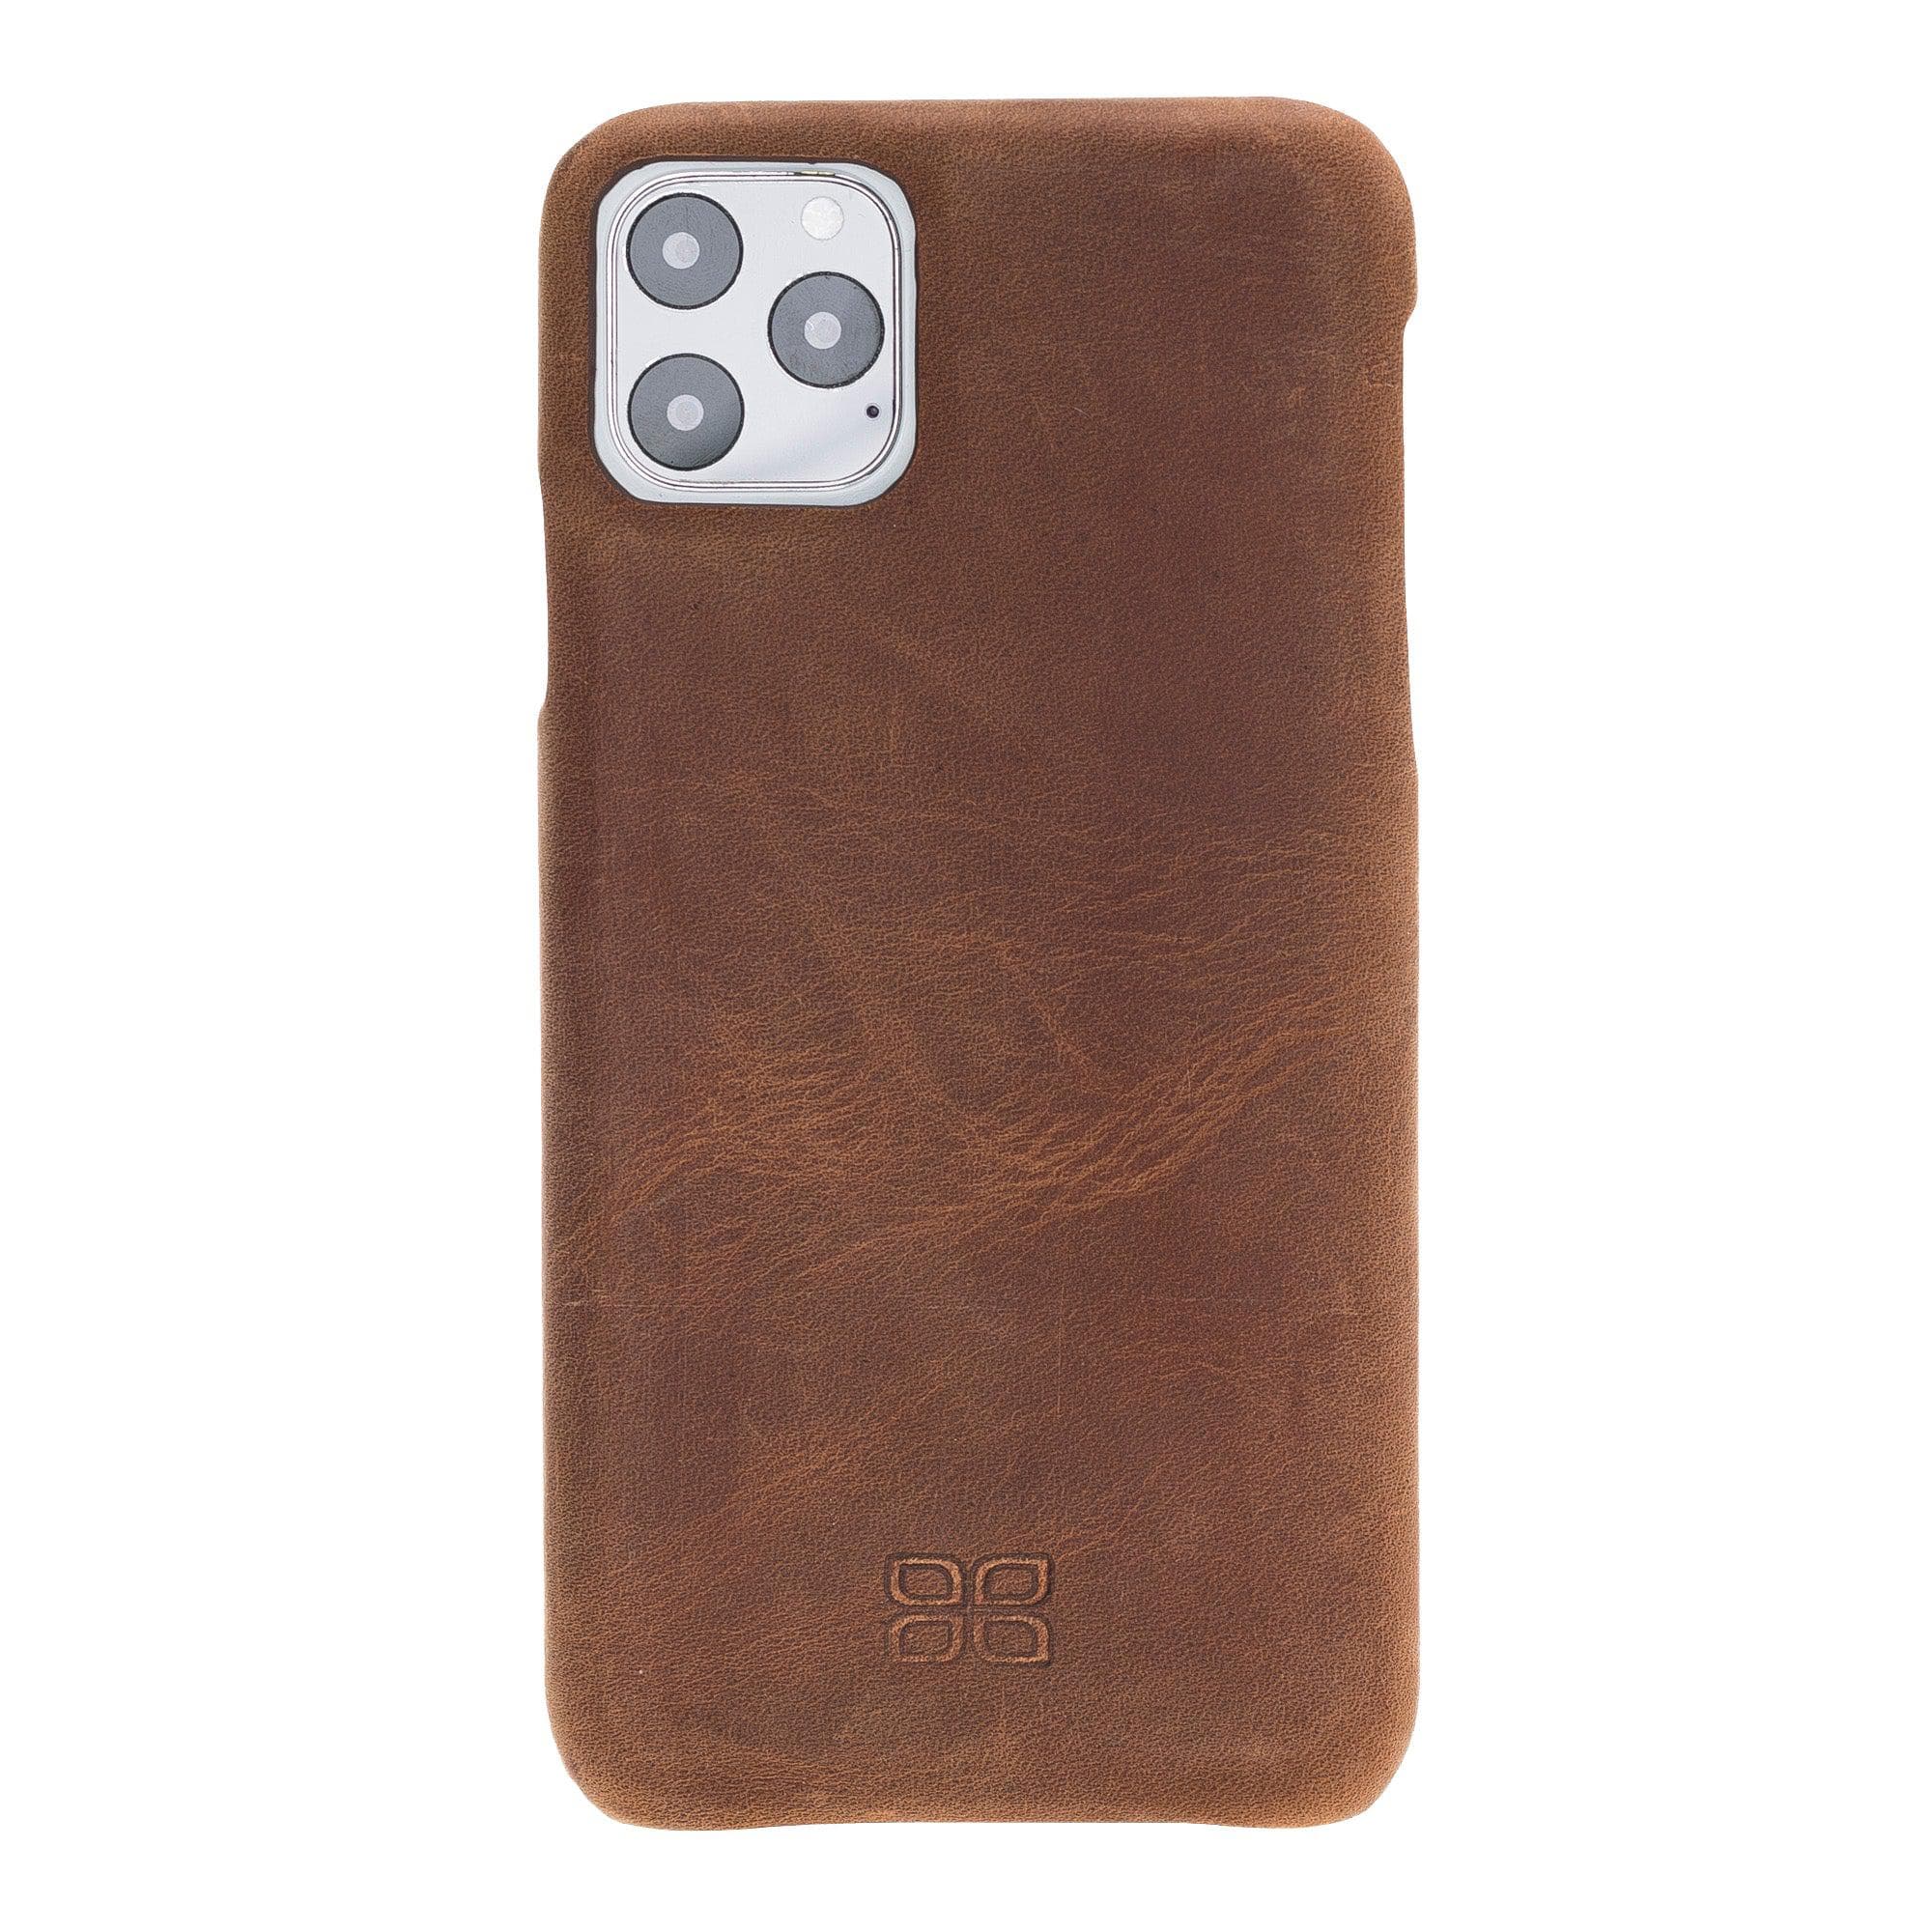 debat Offer Formulering Bouletta Fully Leather Back Cover for Apple iPhone 11 Series